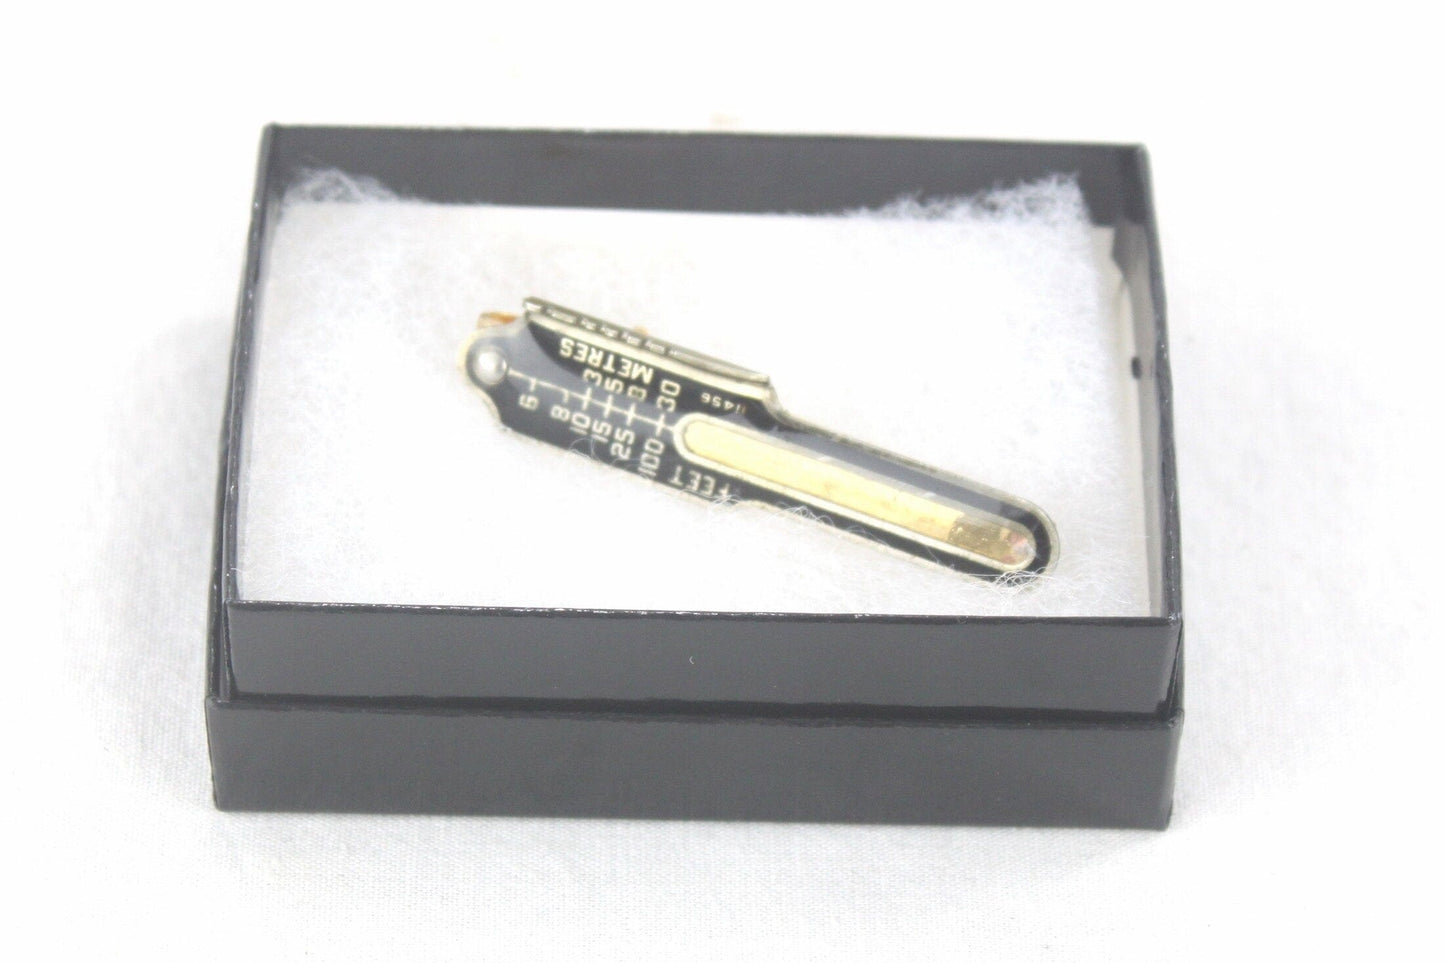 LightAndTimeArt Tie Clips Vintage Kodak Tie Bar - Tie Clip - Gift for dad - Present for husband - Eco-friendly upcycled accessories  - Christmas gift